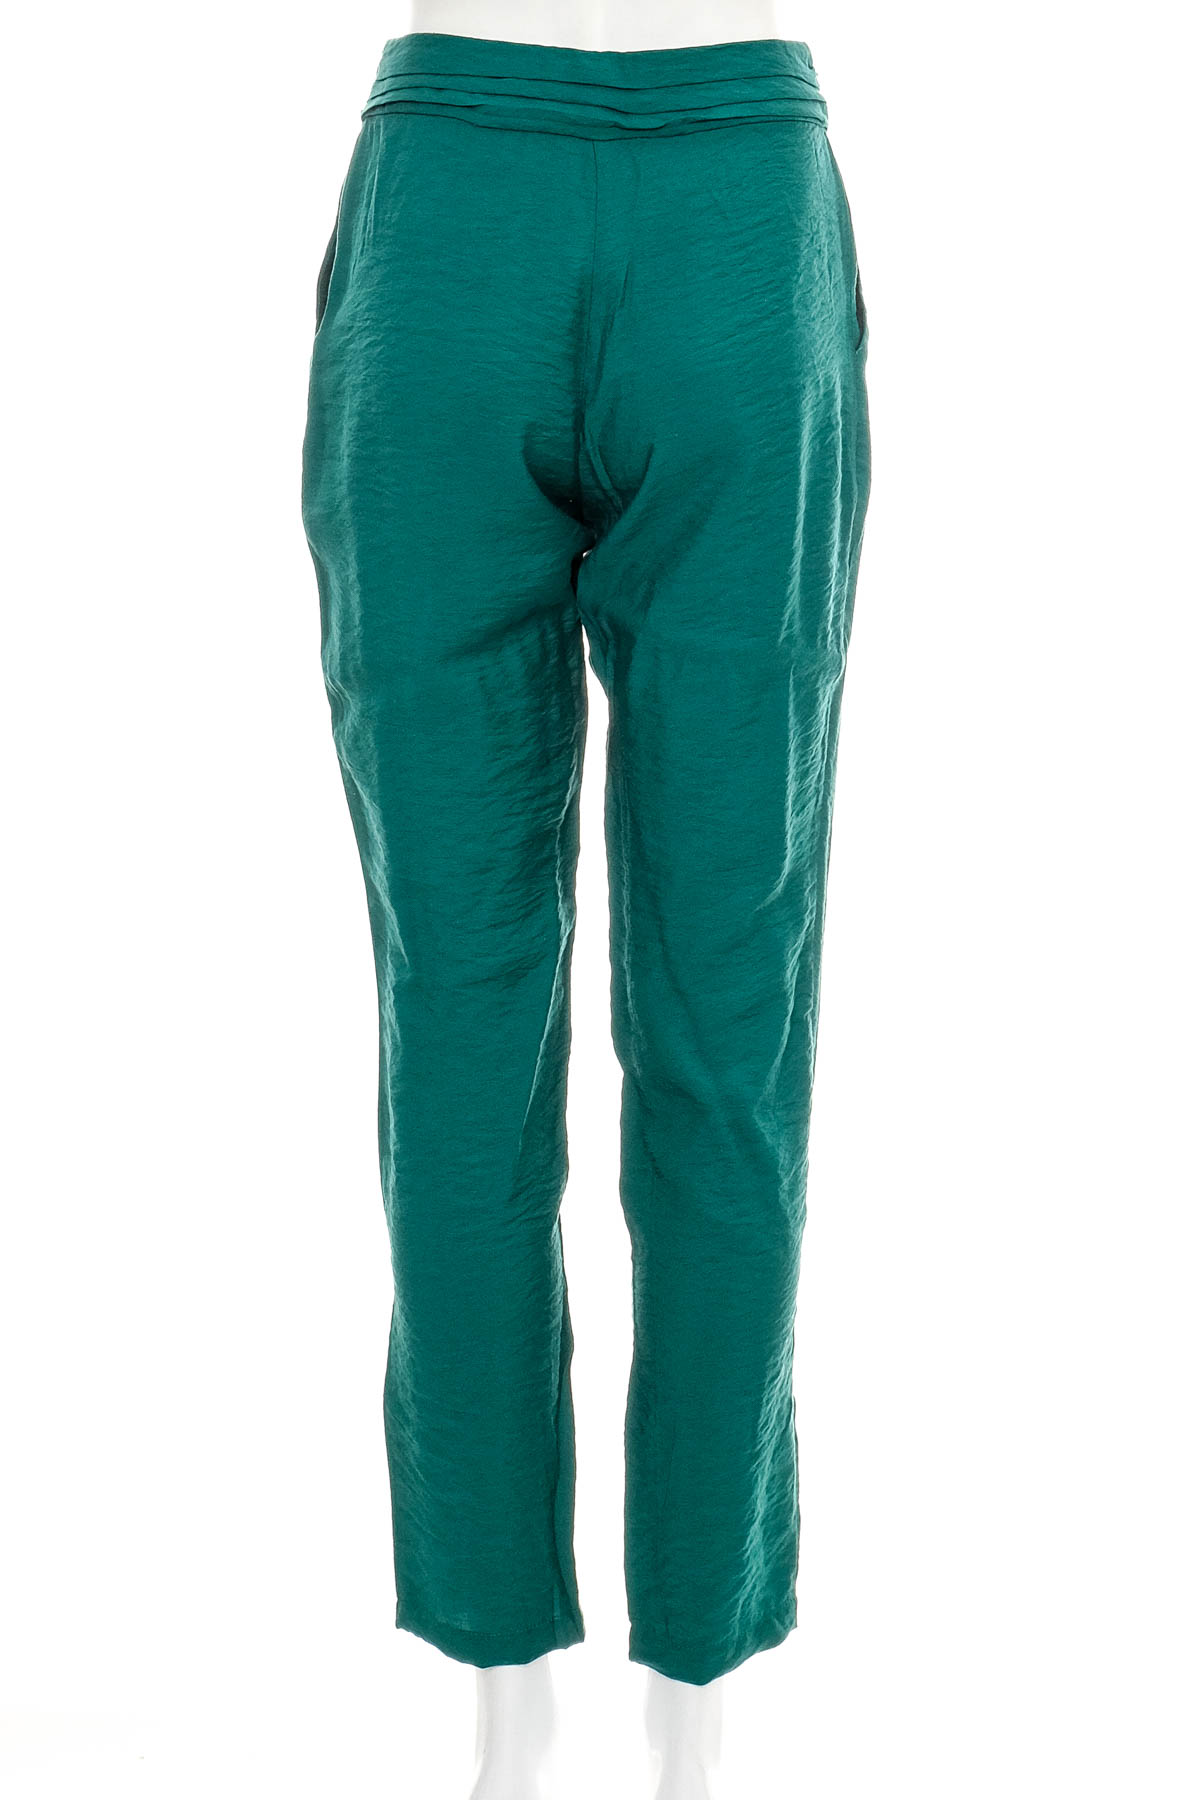 Women's trousers - MNG Collection - 1